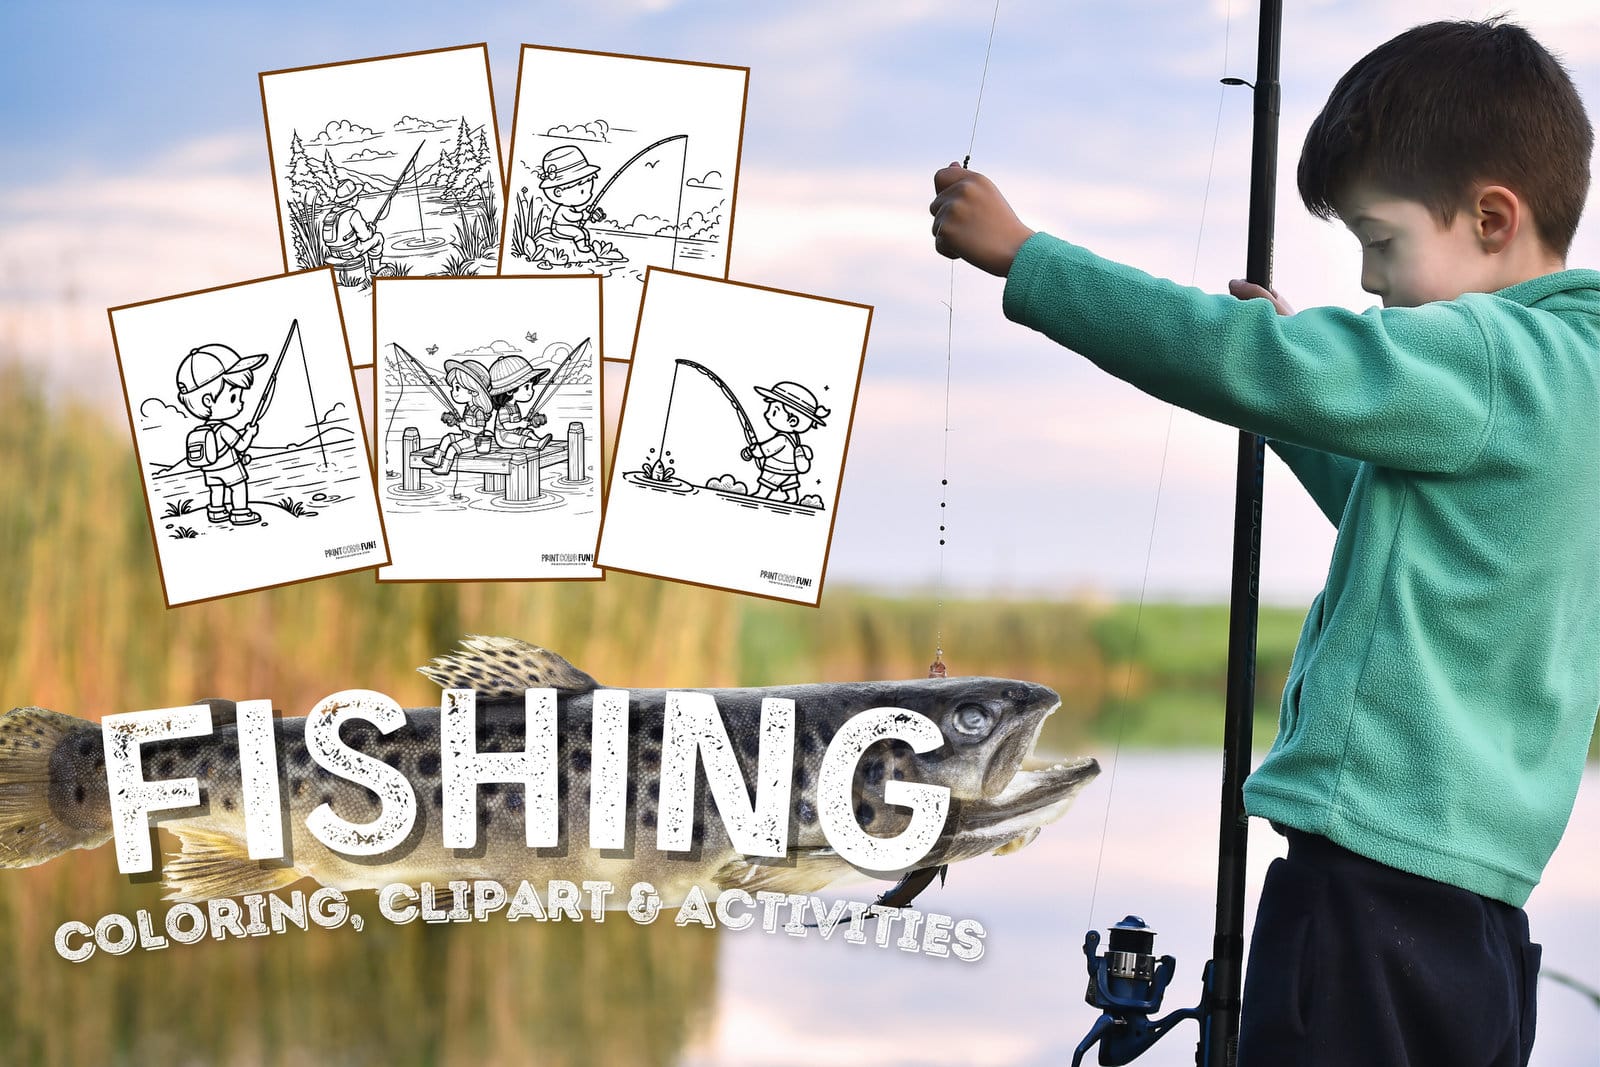 Fishing coloring page clipart activities from PrintColorFun com